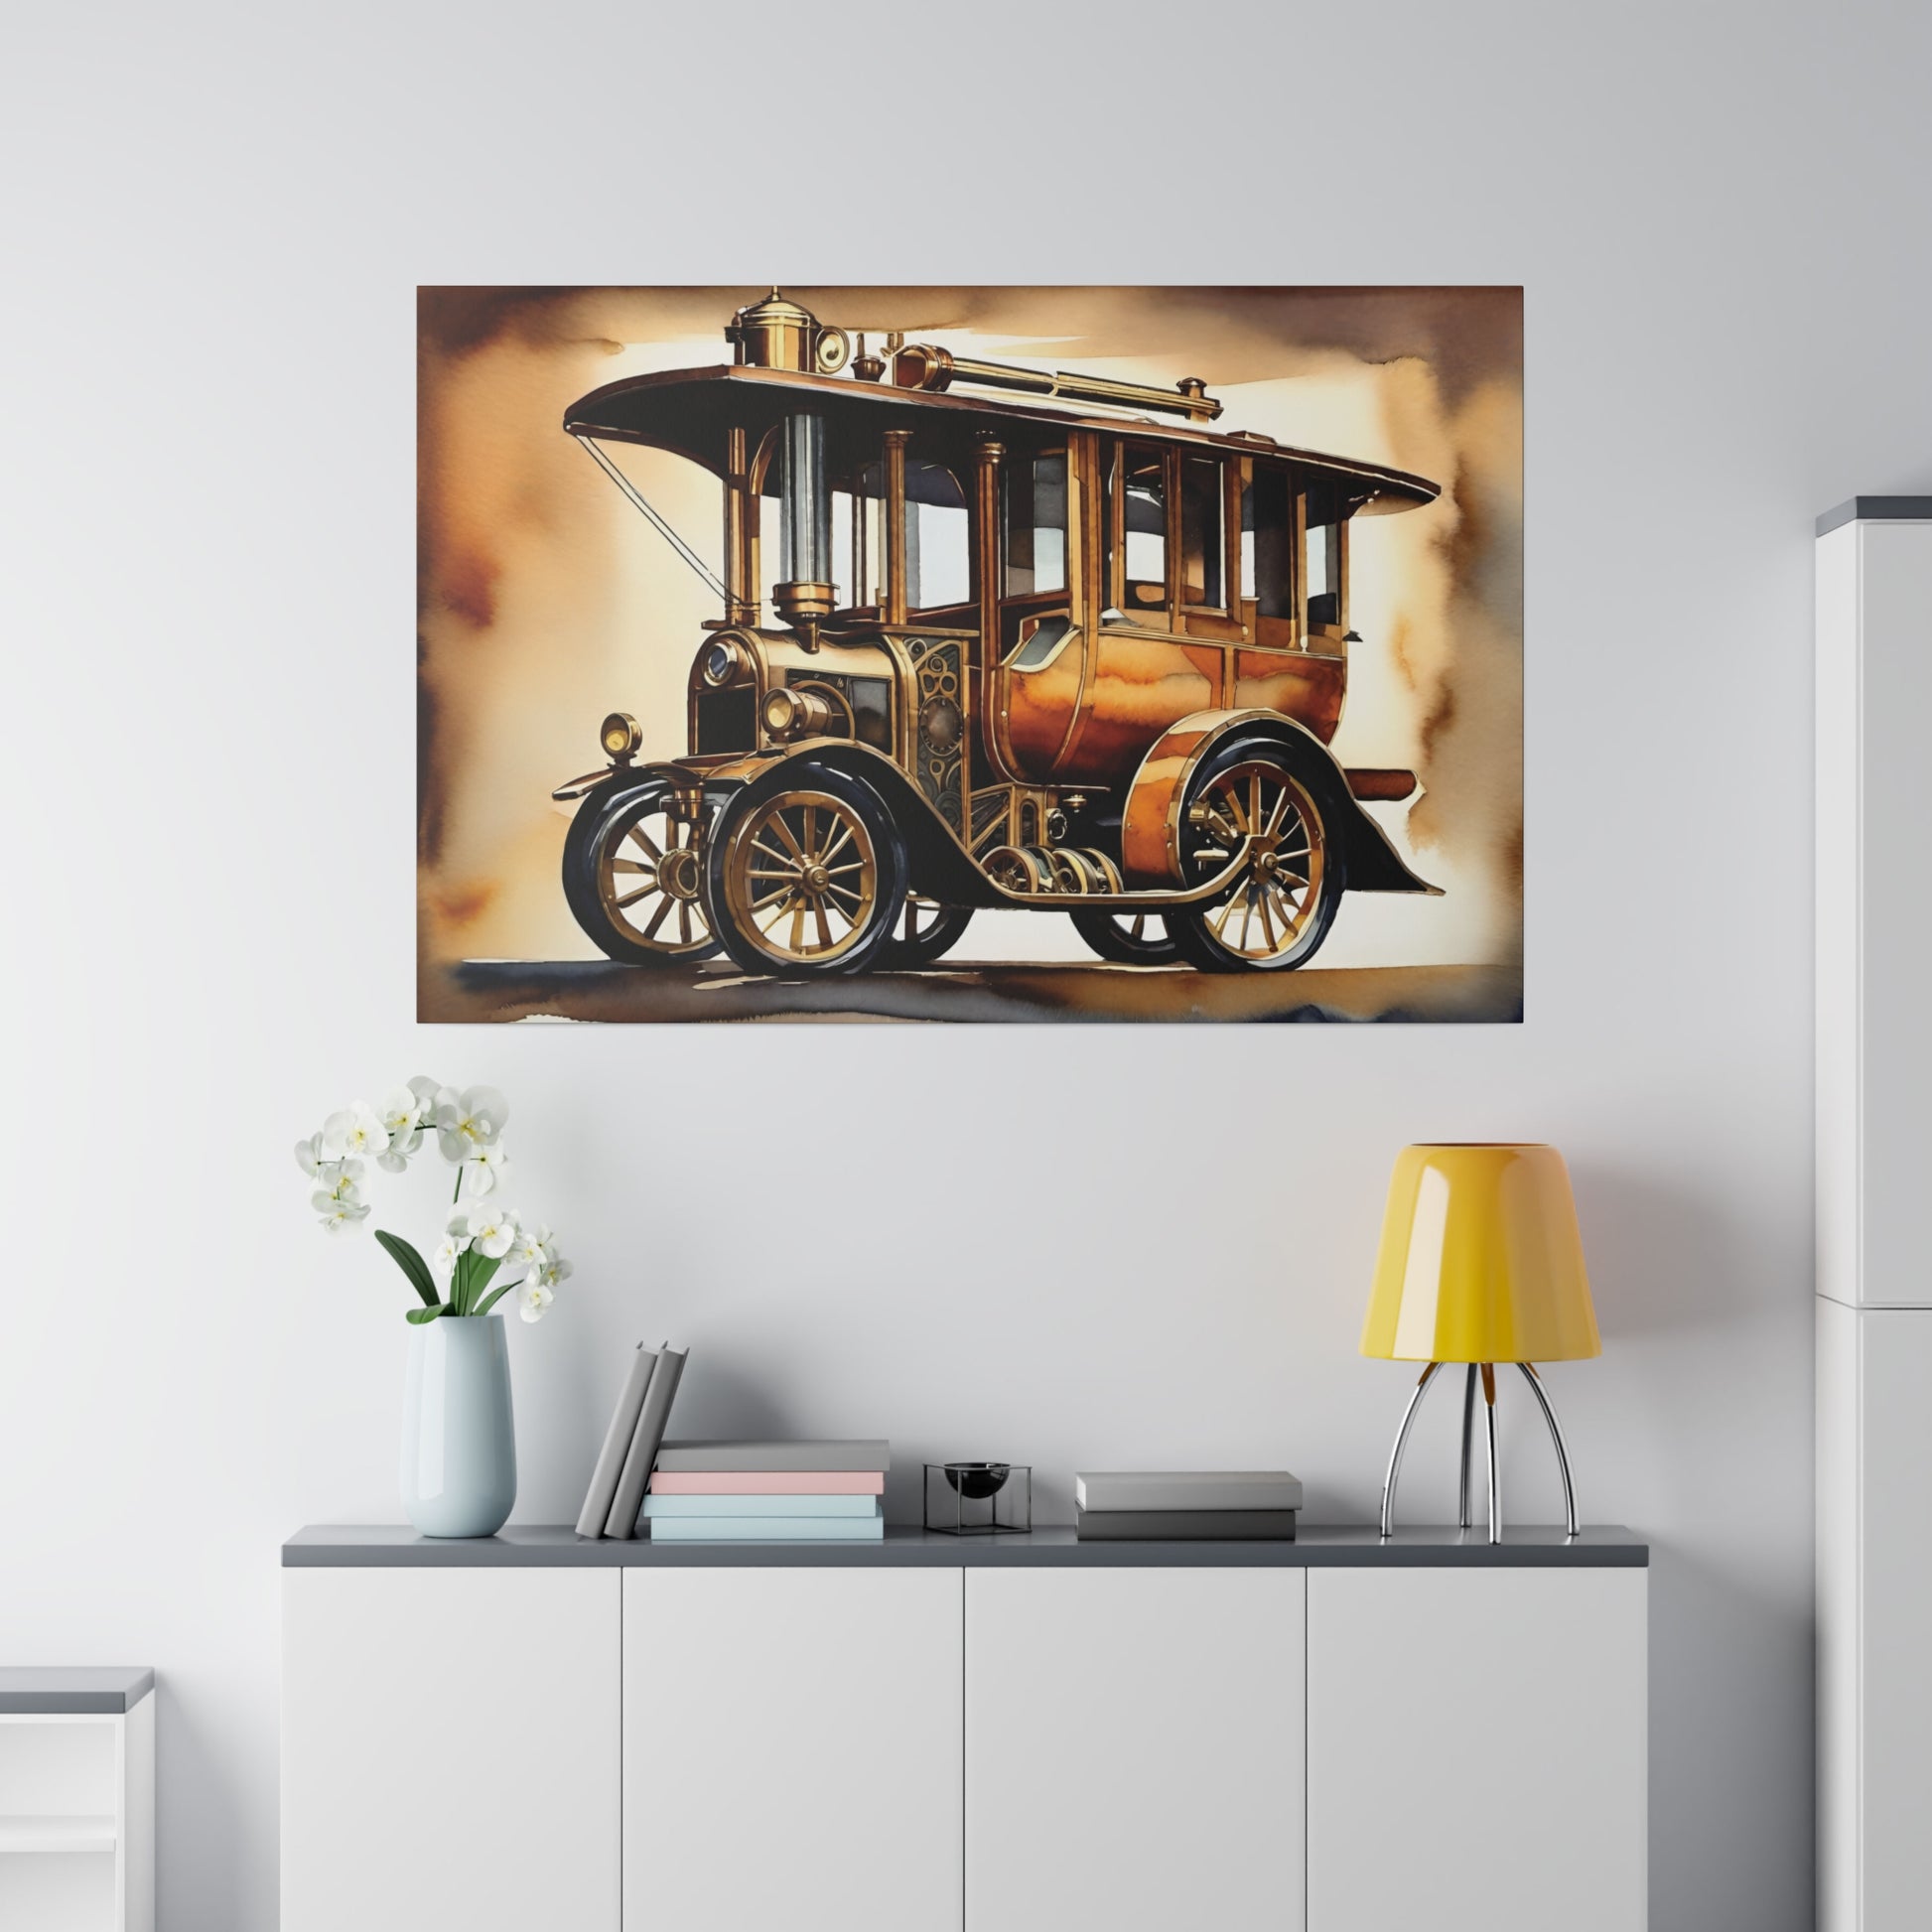 Transform your space with Steampunk Fantasy Canvas Prints. Immerse in a world of gears, airships, and enchanting wonders. Elevate your decor with the magic of intricate steampunk art. 🌟⚙️ #SteampunkArt #FantasyCanvas